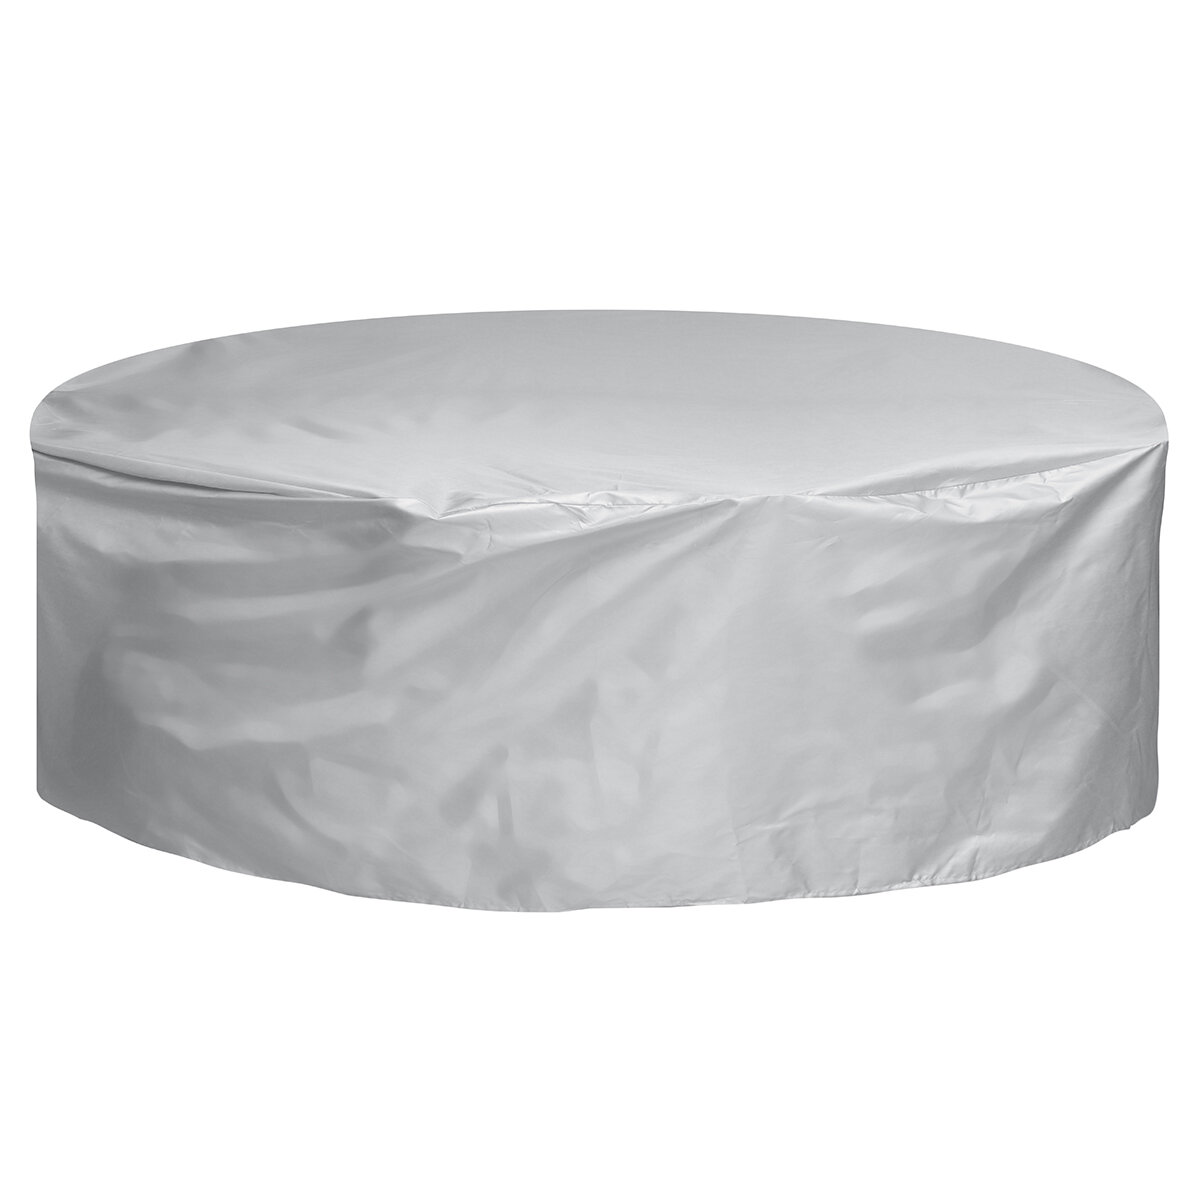 210D Oxford Furniture Cover Round Protective Cover Waterproof Outdoor Garden Dustproof Protector Cover